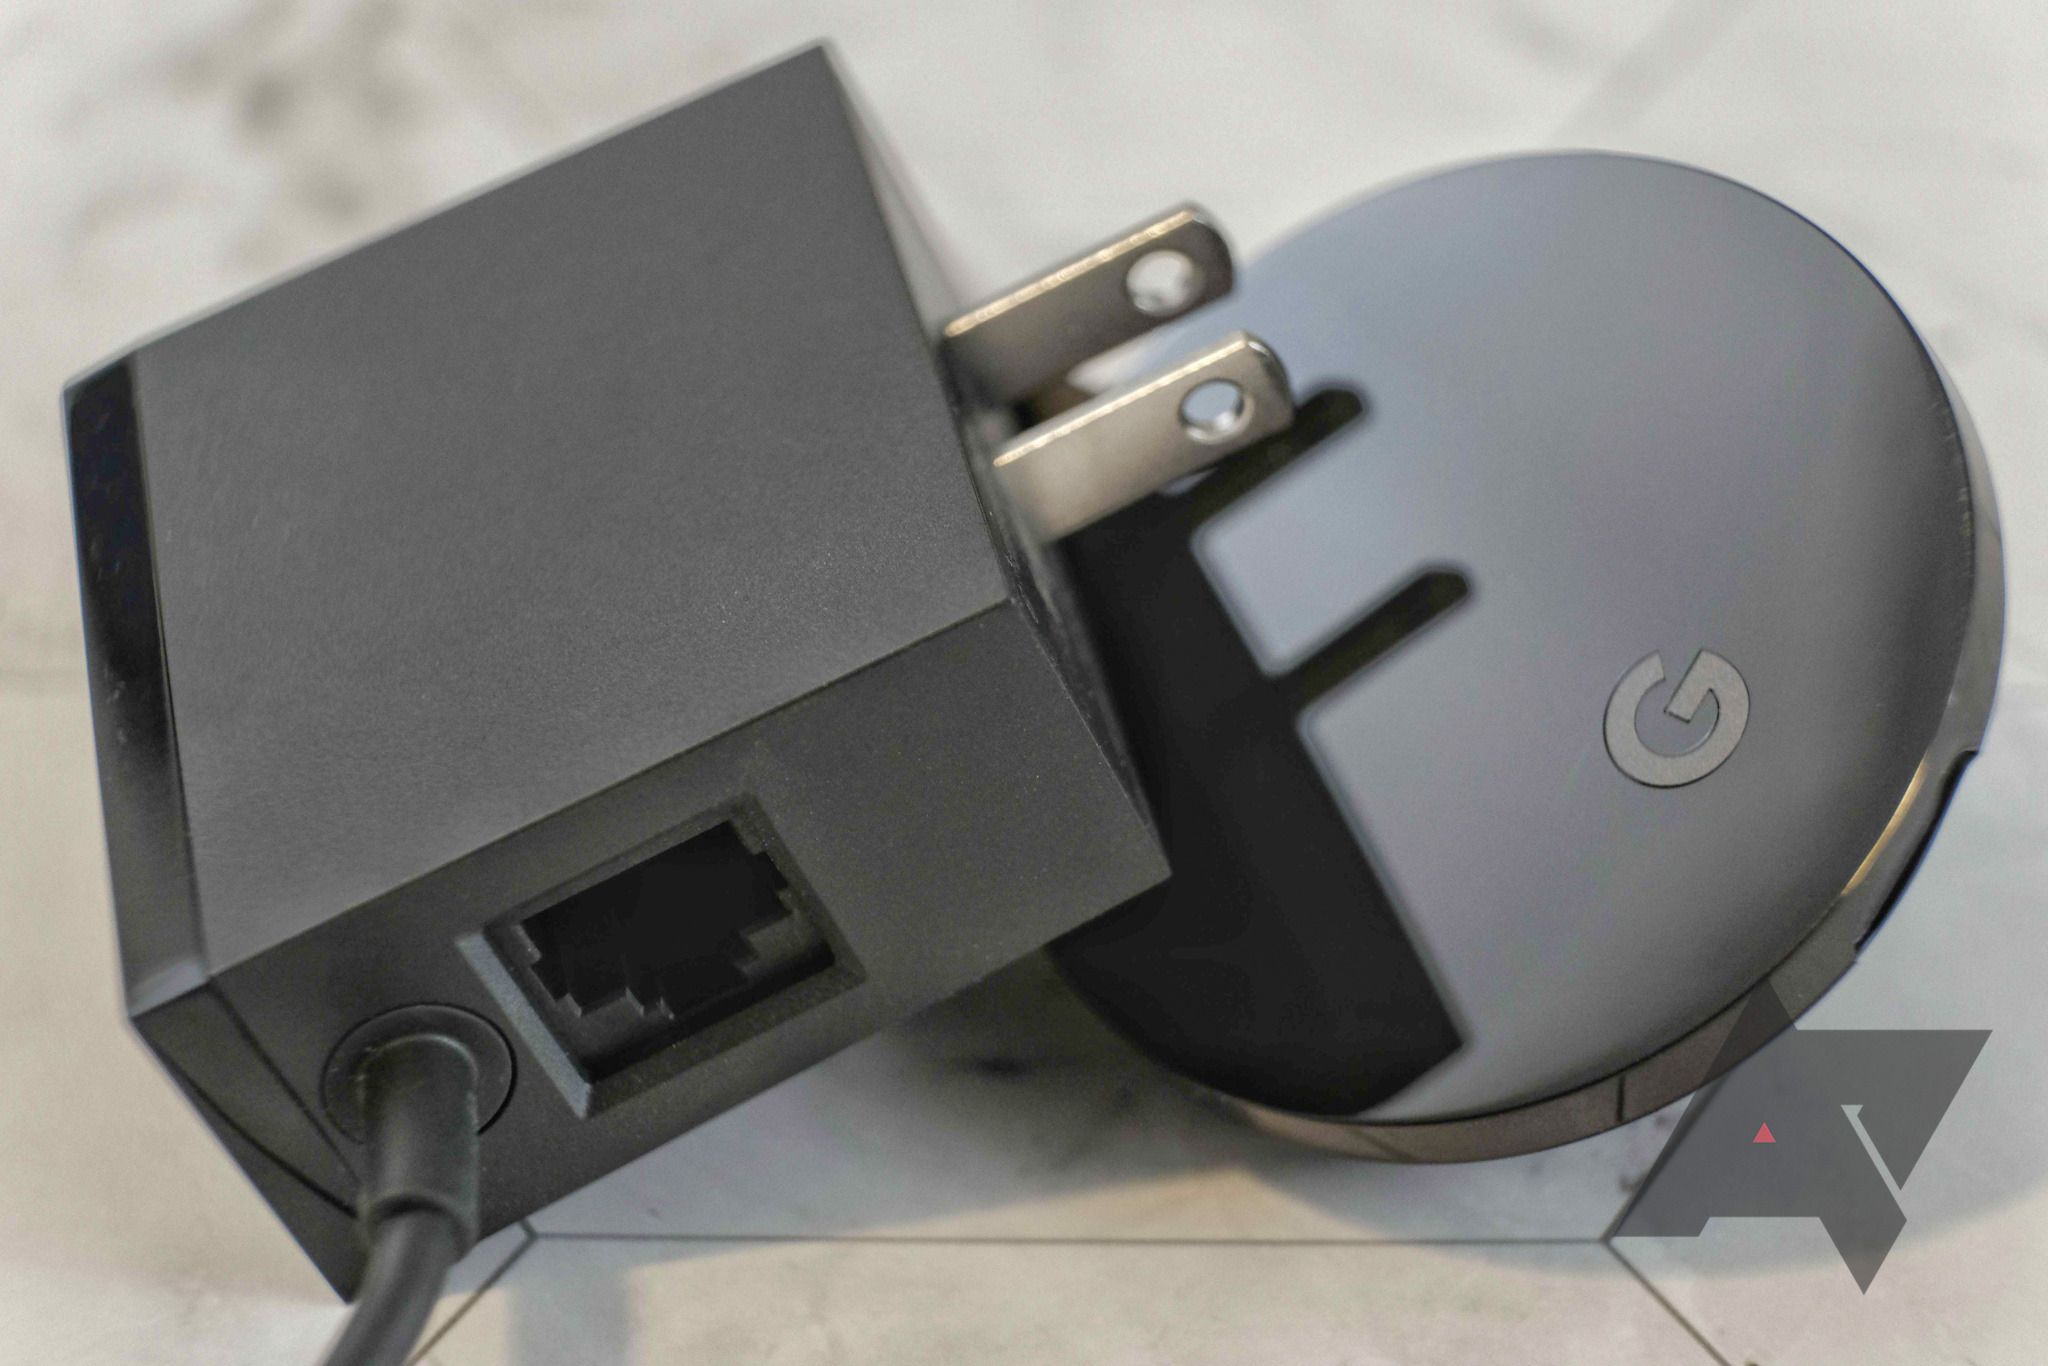 The new Chromecast with Google TV will get an Ethernet adapter, but it will cost $20